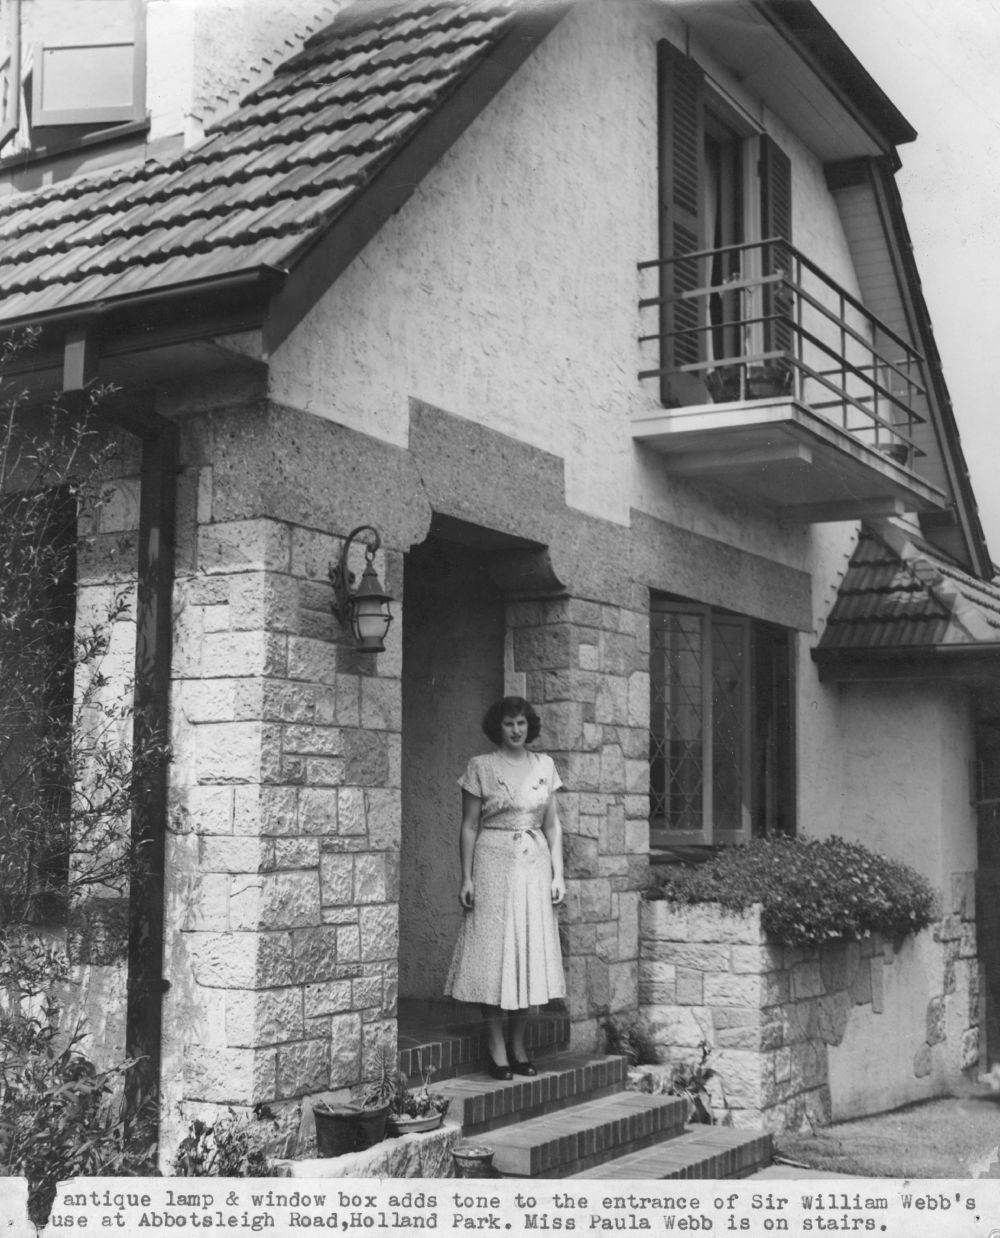 This is an image of the Front entrance to the Webb family residence in Holland Park, 1948. the caption reads "antique lamp & window box adds tone to the entrance of Sir William Webb's house at Abbotsleigh Road, Holland Park. Miss Paula Webb is on stairs"